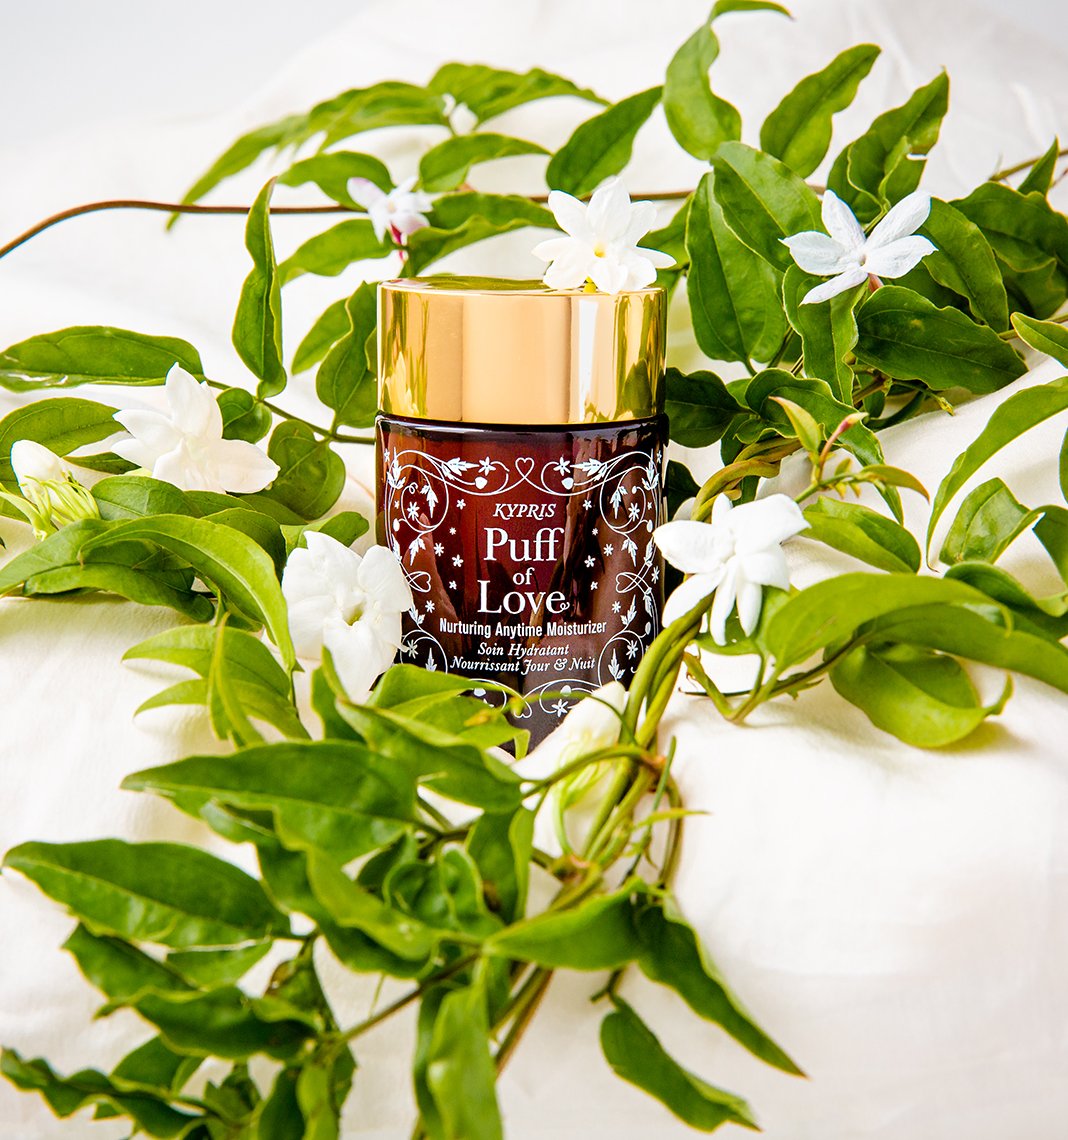 Puff of Love Moisturizer, in amber glass jar with gold lid, in a bed of jasmine. 